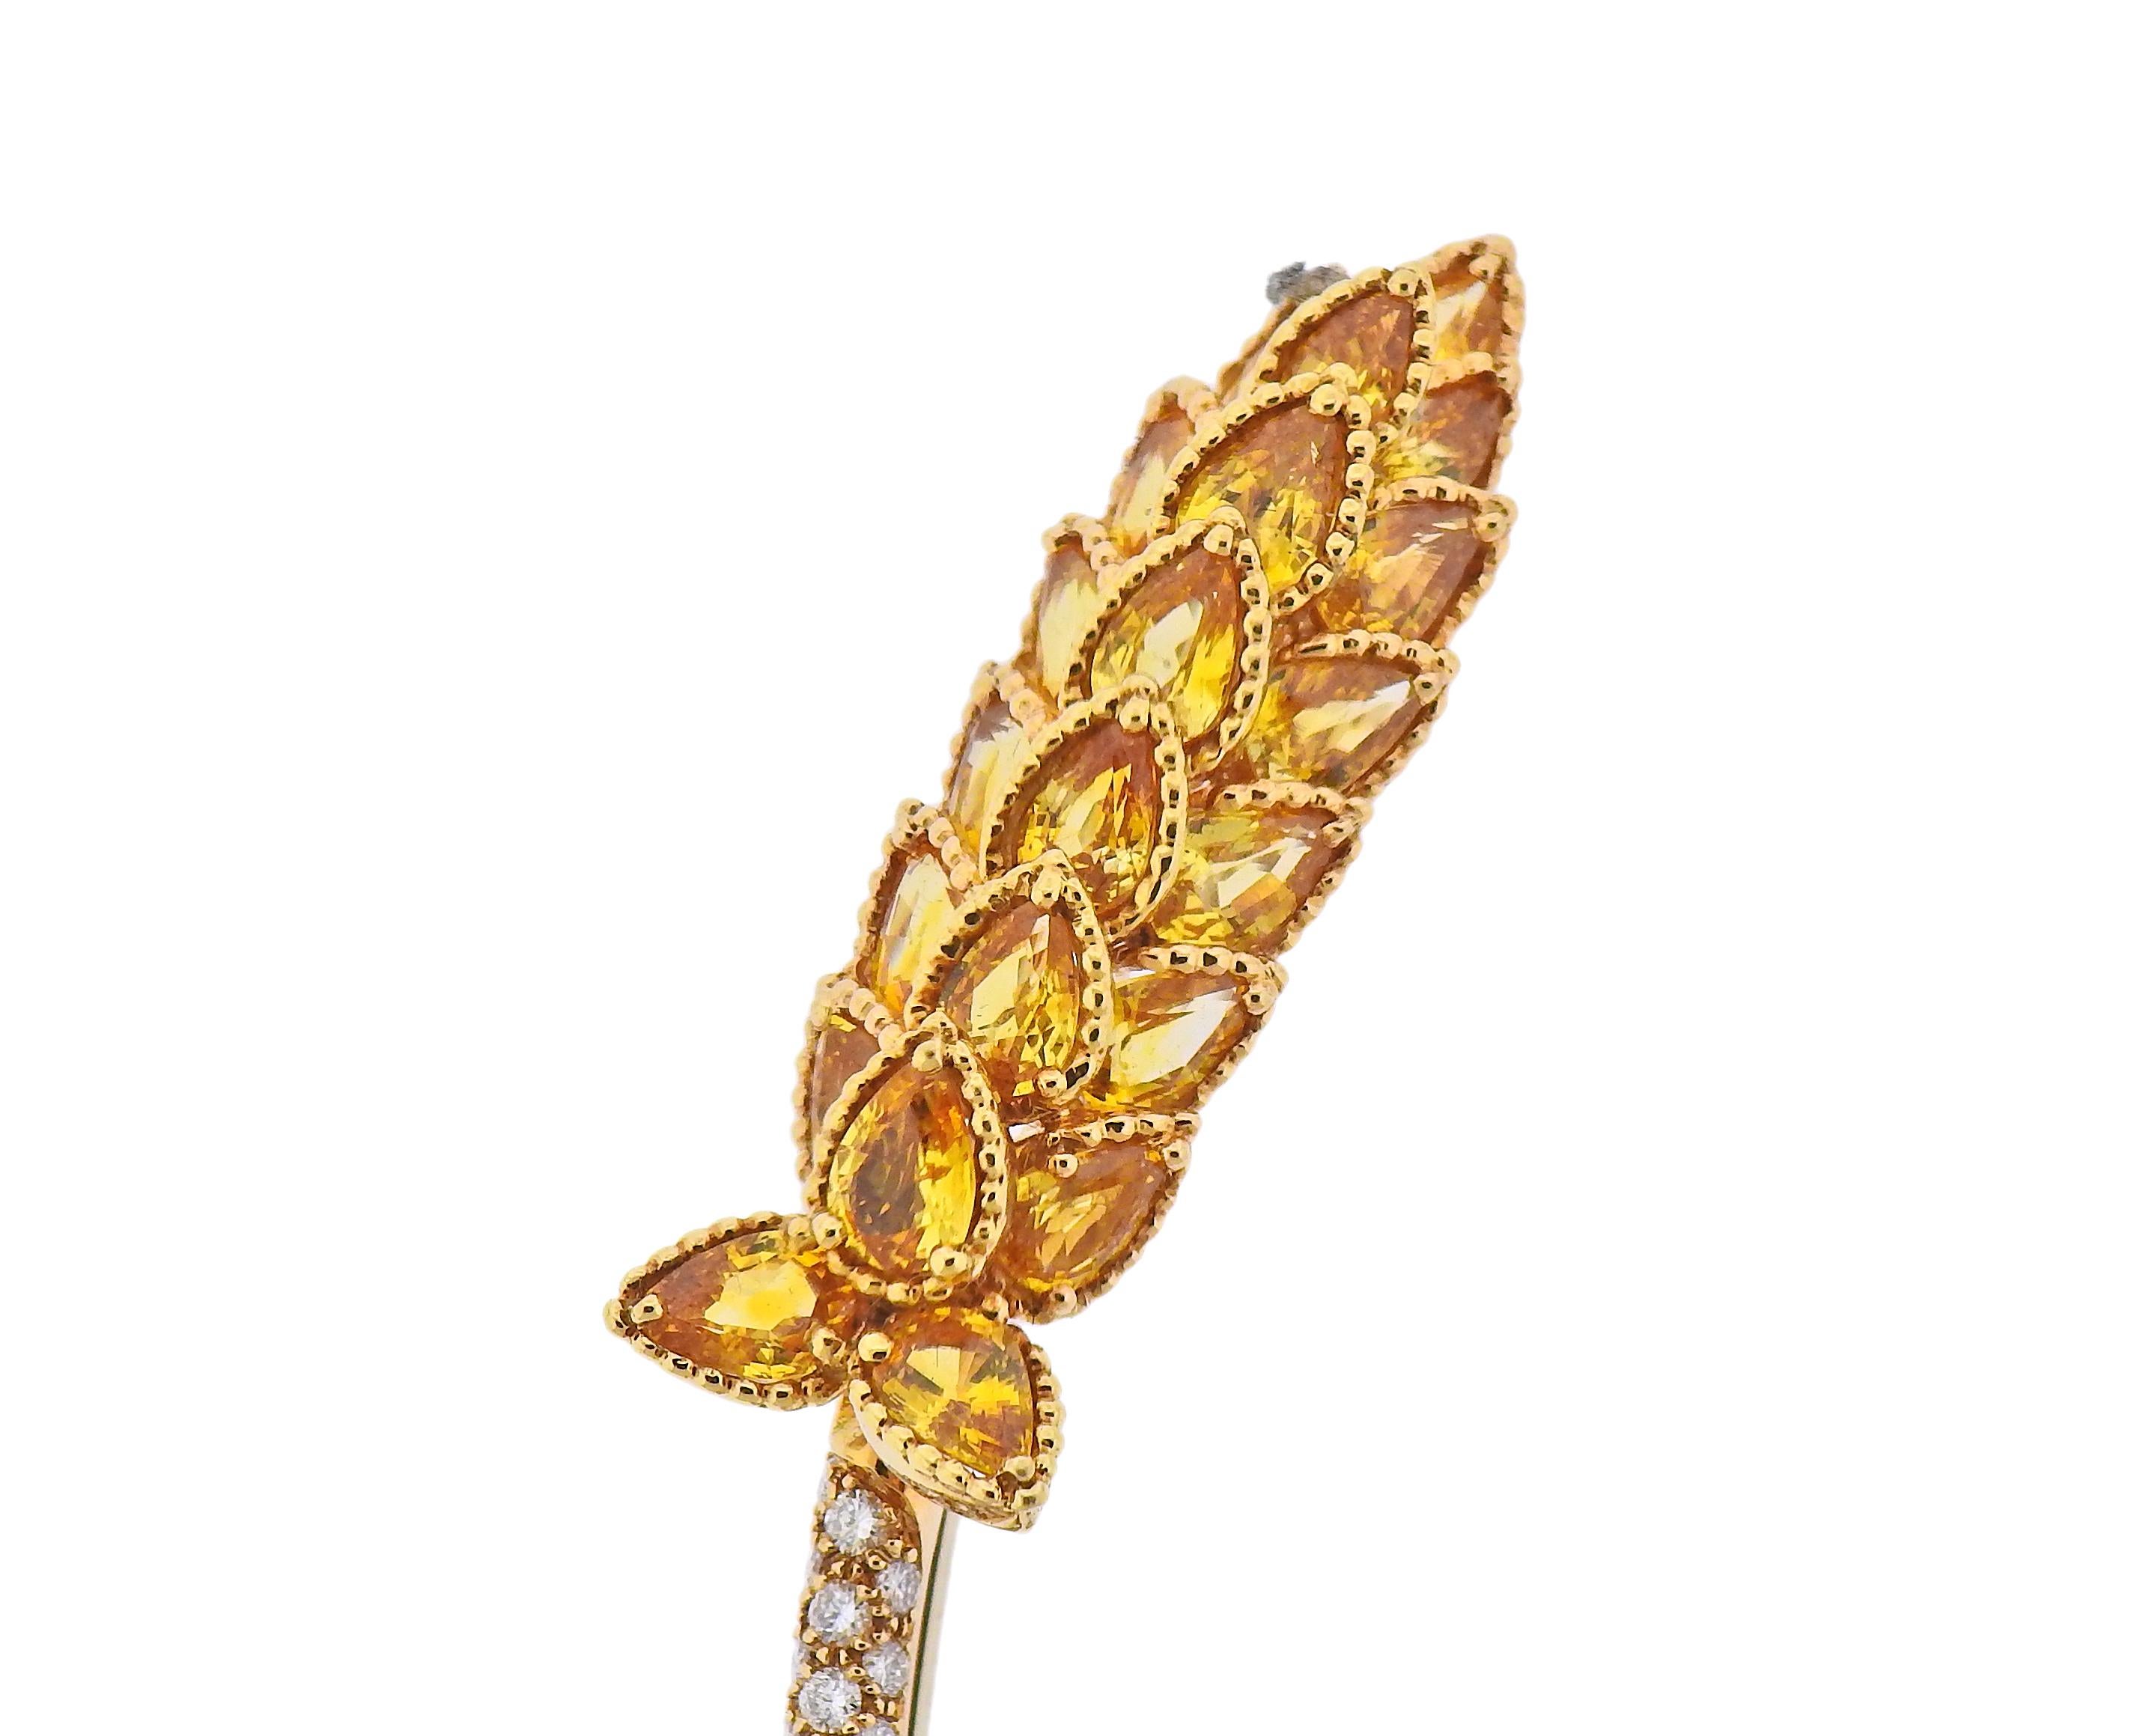 18k gold brooch, designed by Chanel, set with yellow sapphires and approx. 1.40ctw in diamonds. Brooch measures 90mm x 14mm. Marked: Chanel, 7 D 41, or 750. Weight - 18.4 grams.